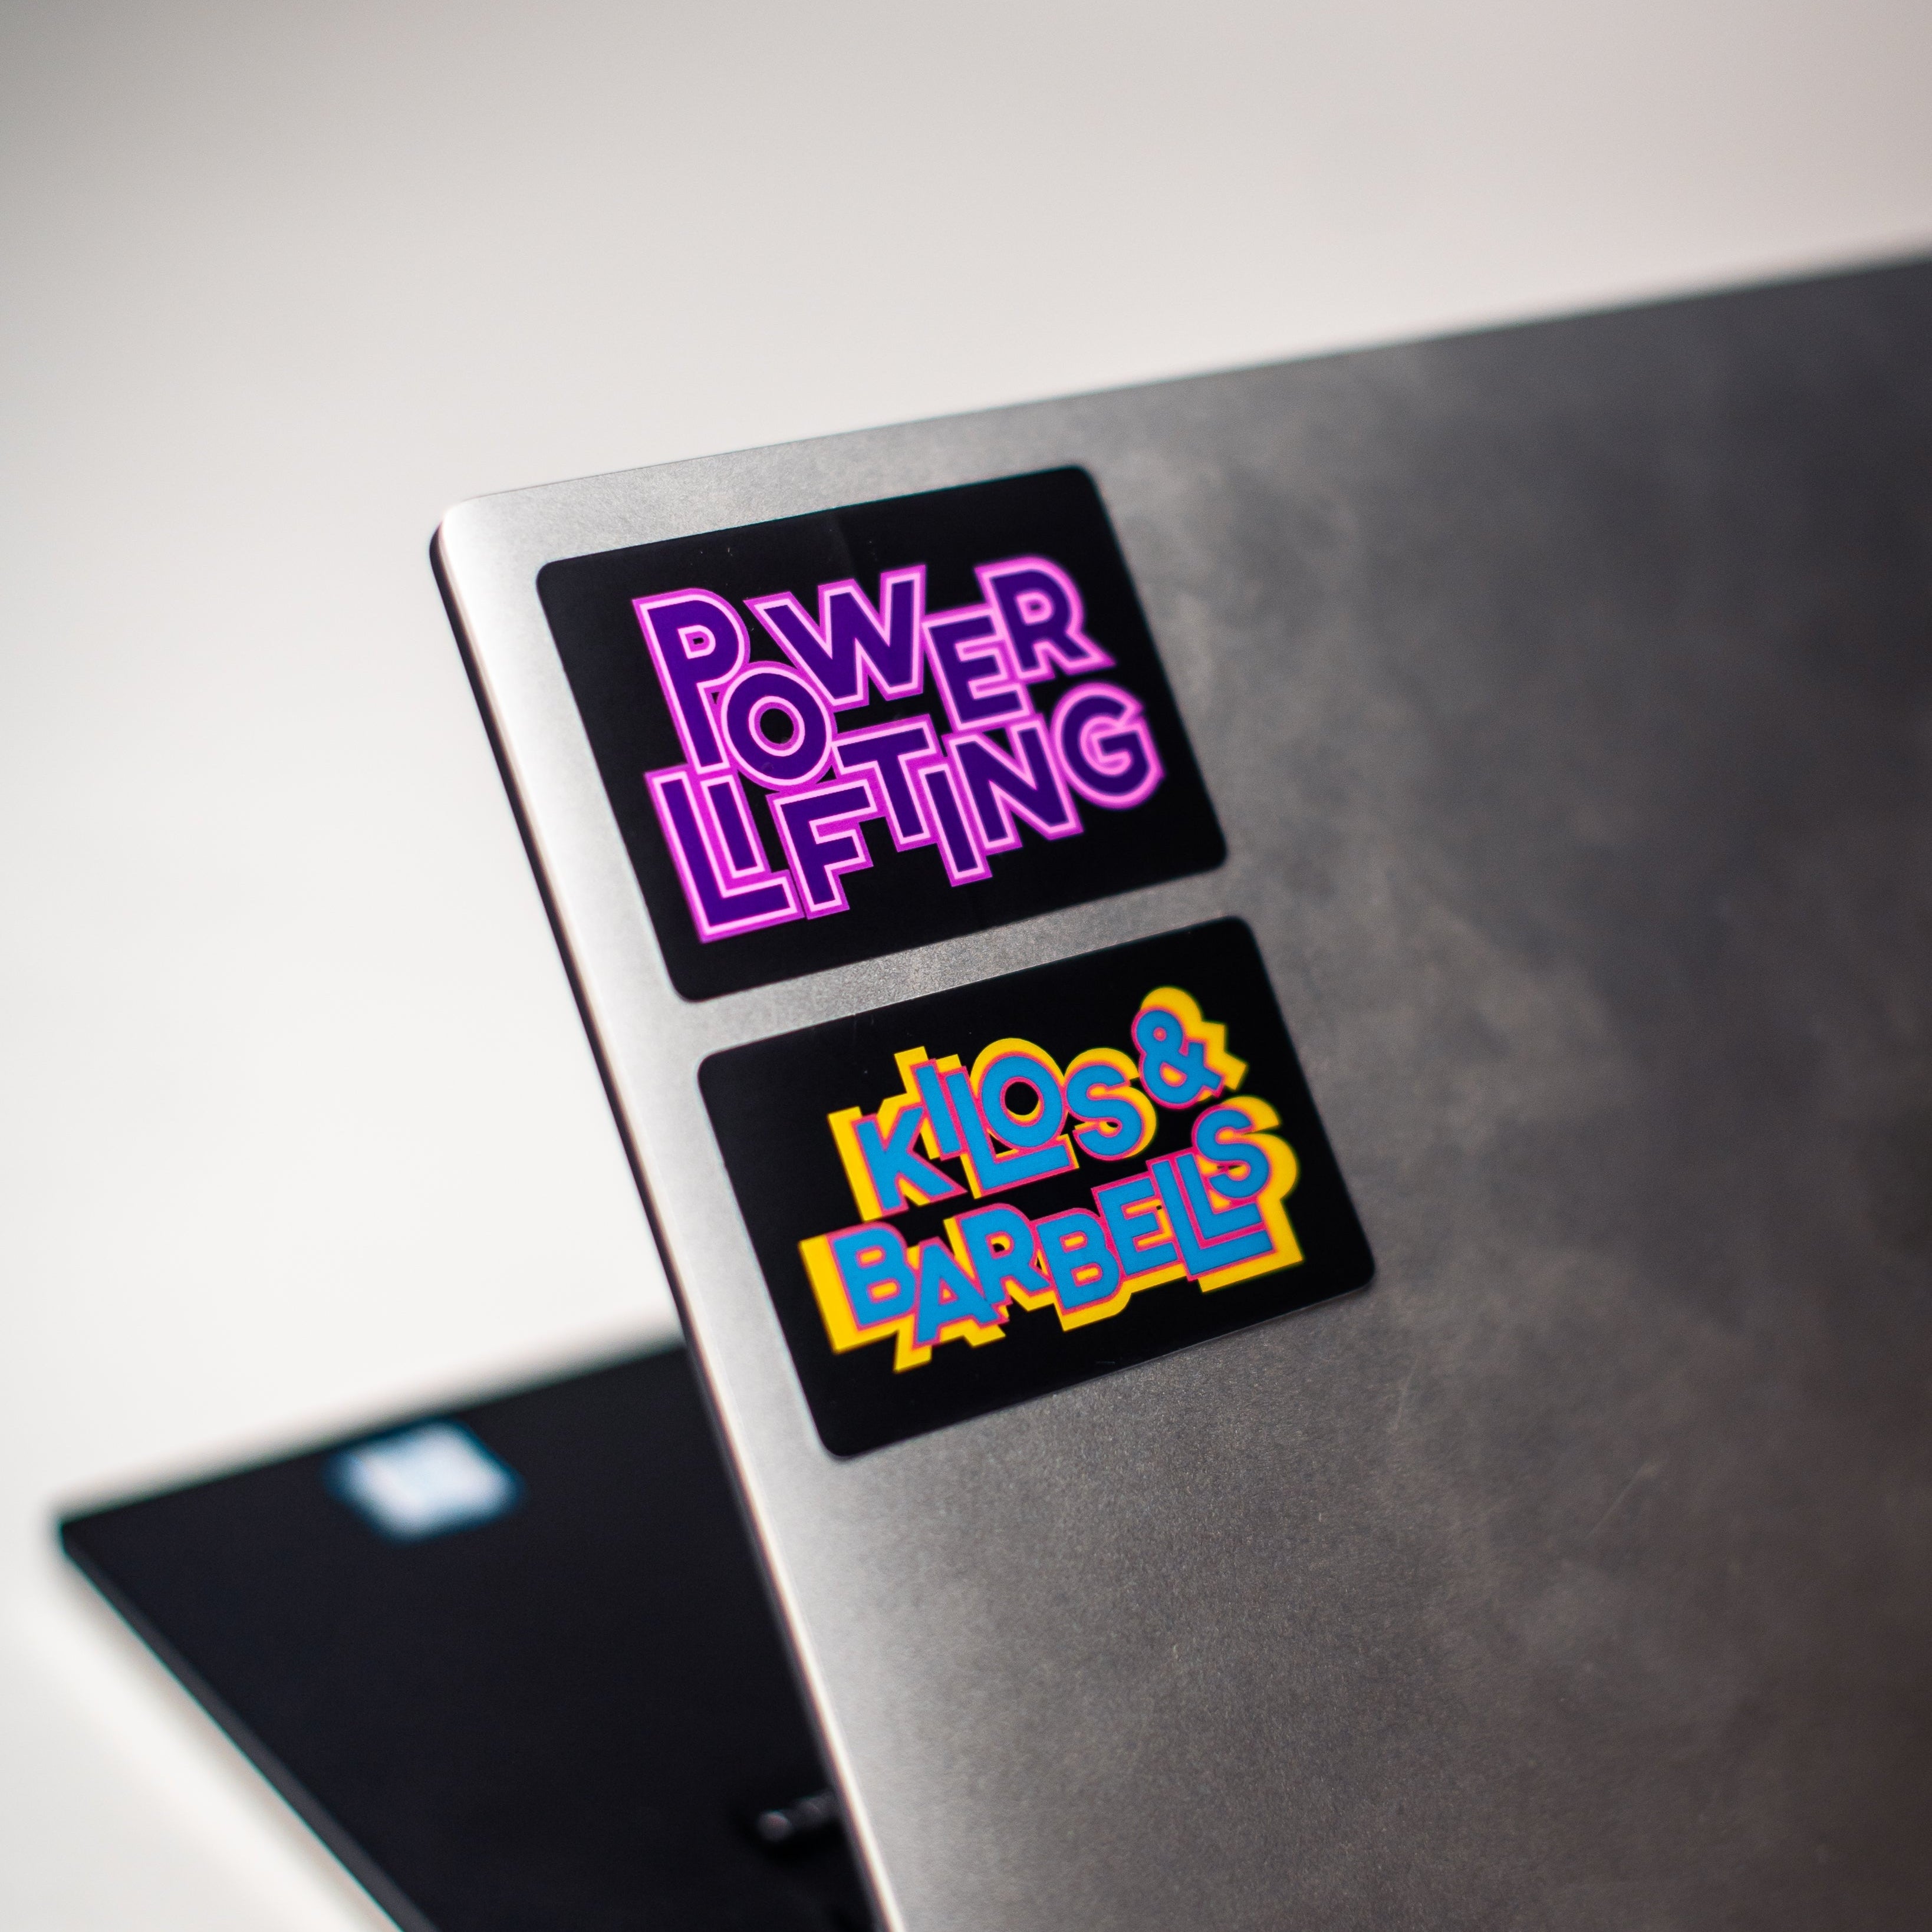 A7 Purple Power Sticker combines the dark with the fun and colourful designs to bring that pop of colour into the daily workouts. The sticker dye-cut, made from durable polypropylene and is 3 in wide x 2 in high. Purchase Purple Power sticker from A7 UK.